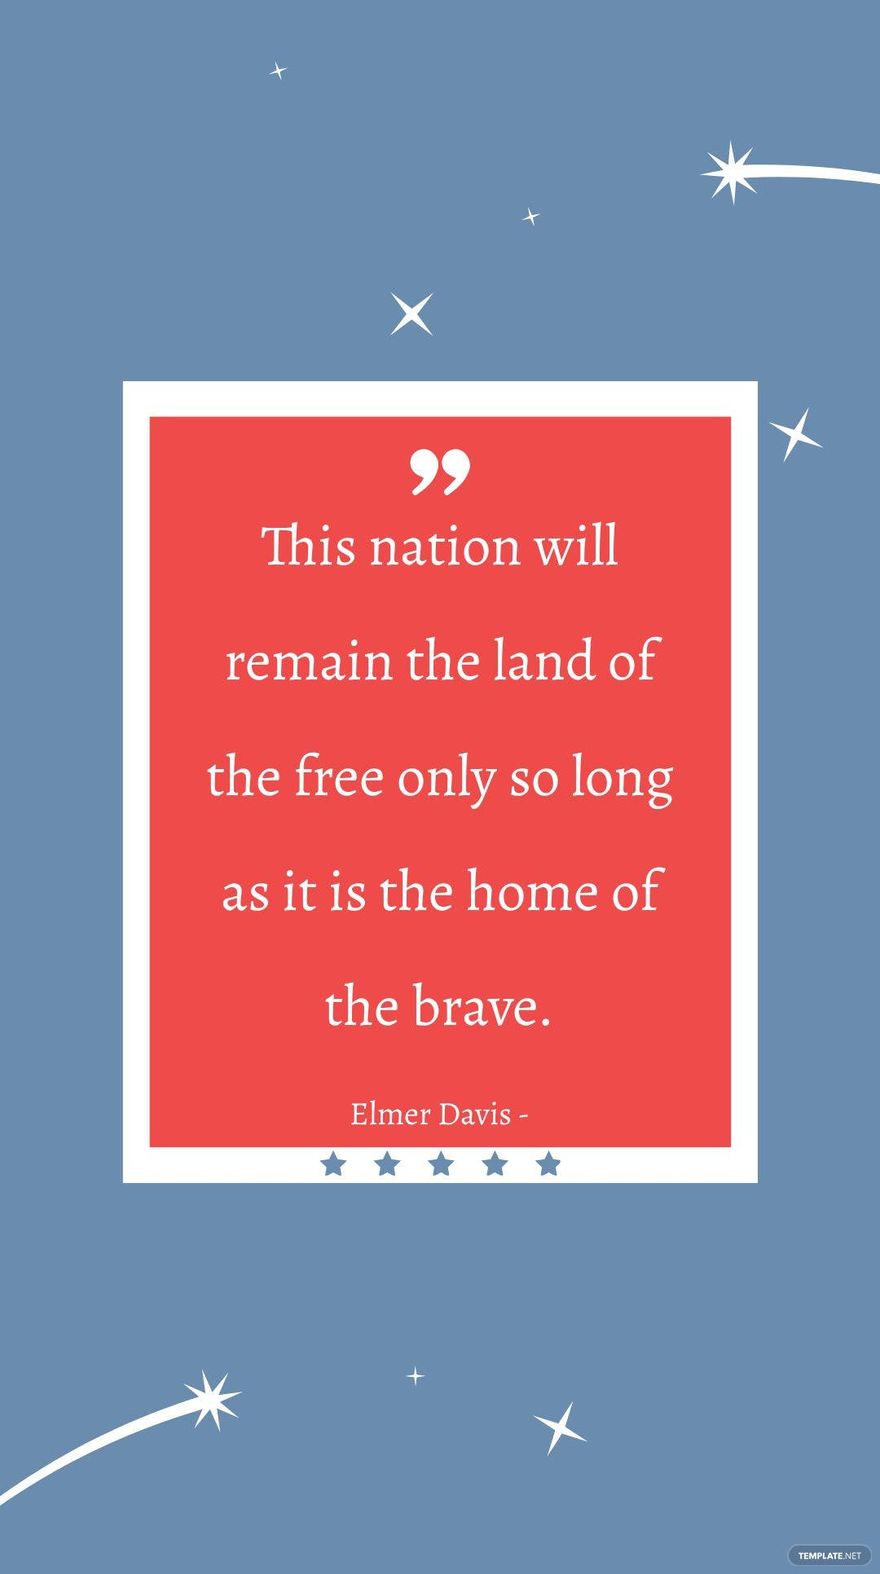 Elmer Davis - This nation will remain the land of the only so long as it is the home of the brave.